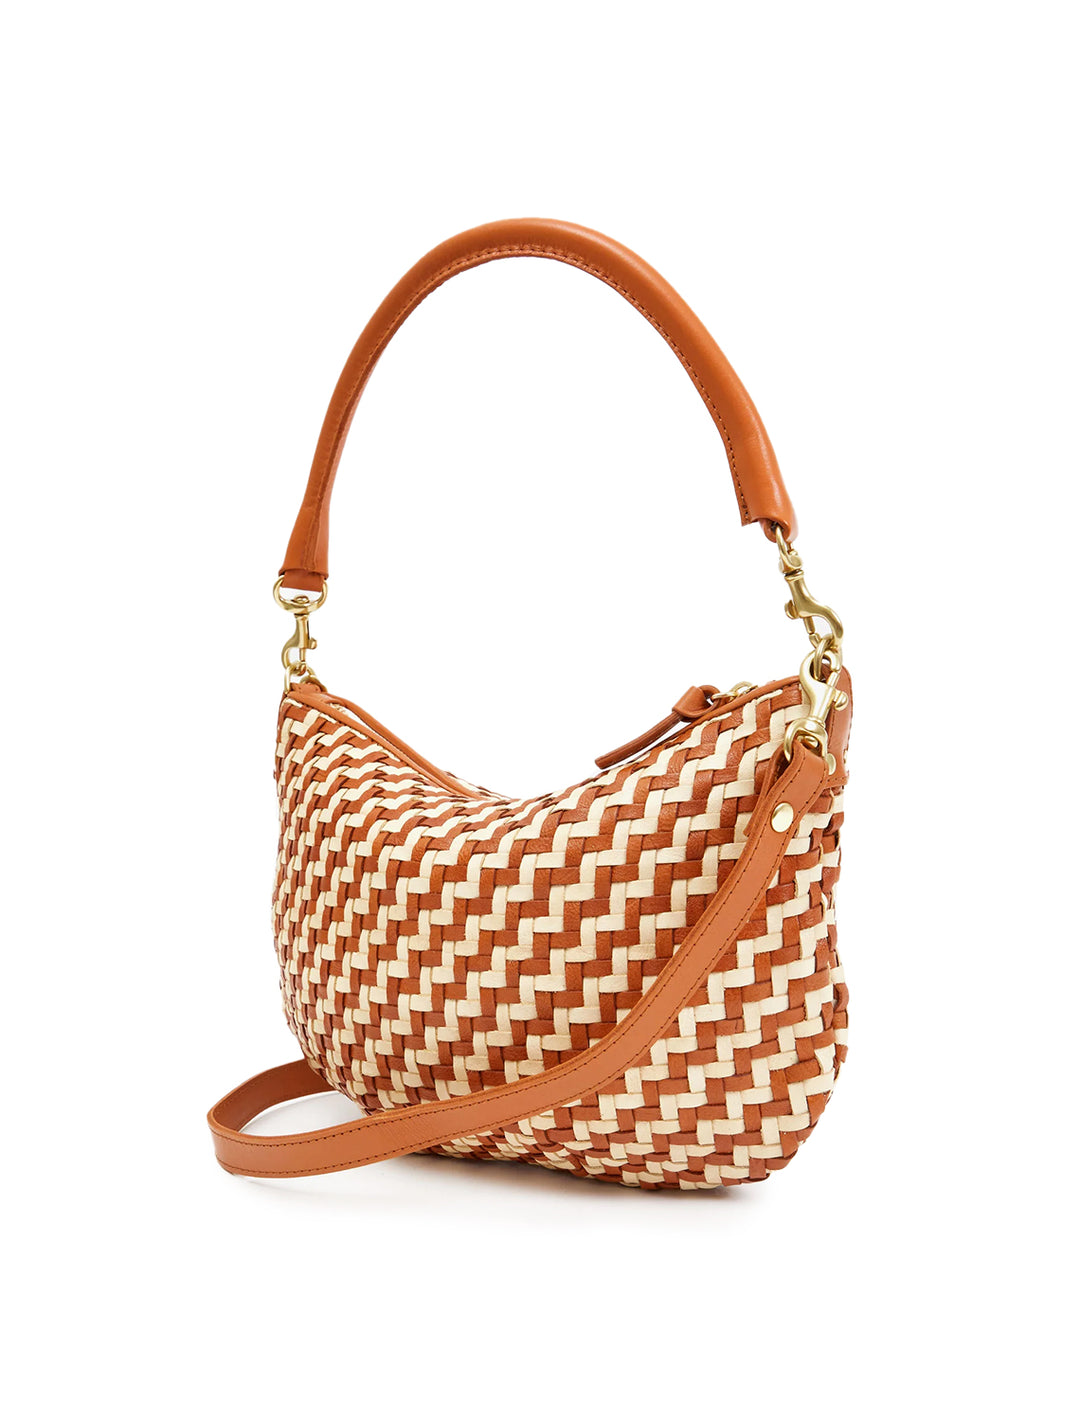 Side angle view of Clare V.'s petite moyen messenger in natural and cream woven zig zag.